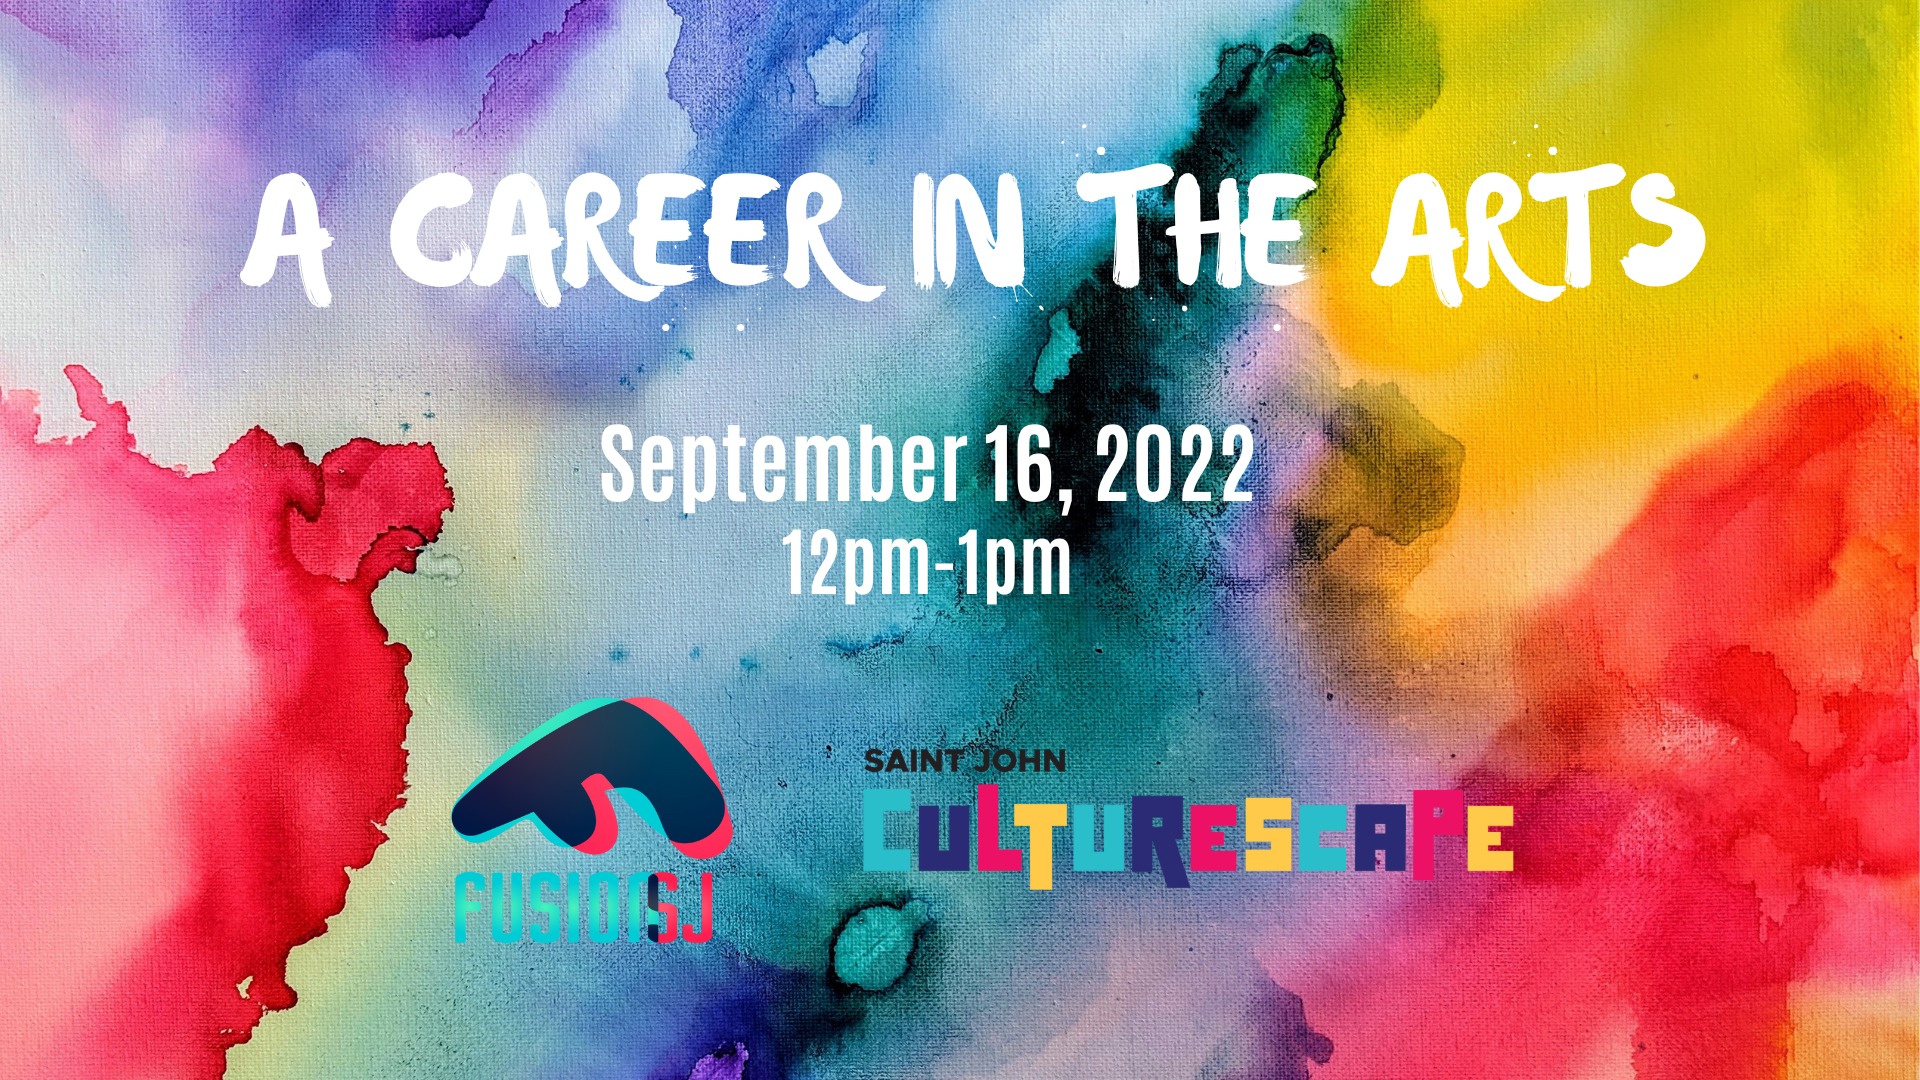 A career in the arts. September 16, 2022. 12pm - 1pm. Fusion SJ and Saint John Culturescape